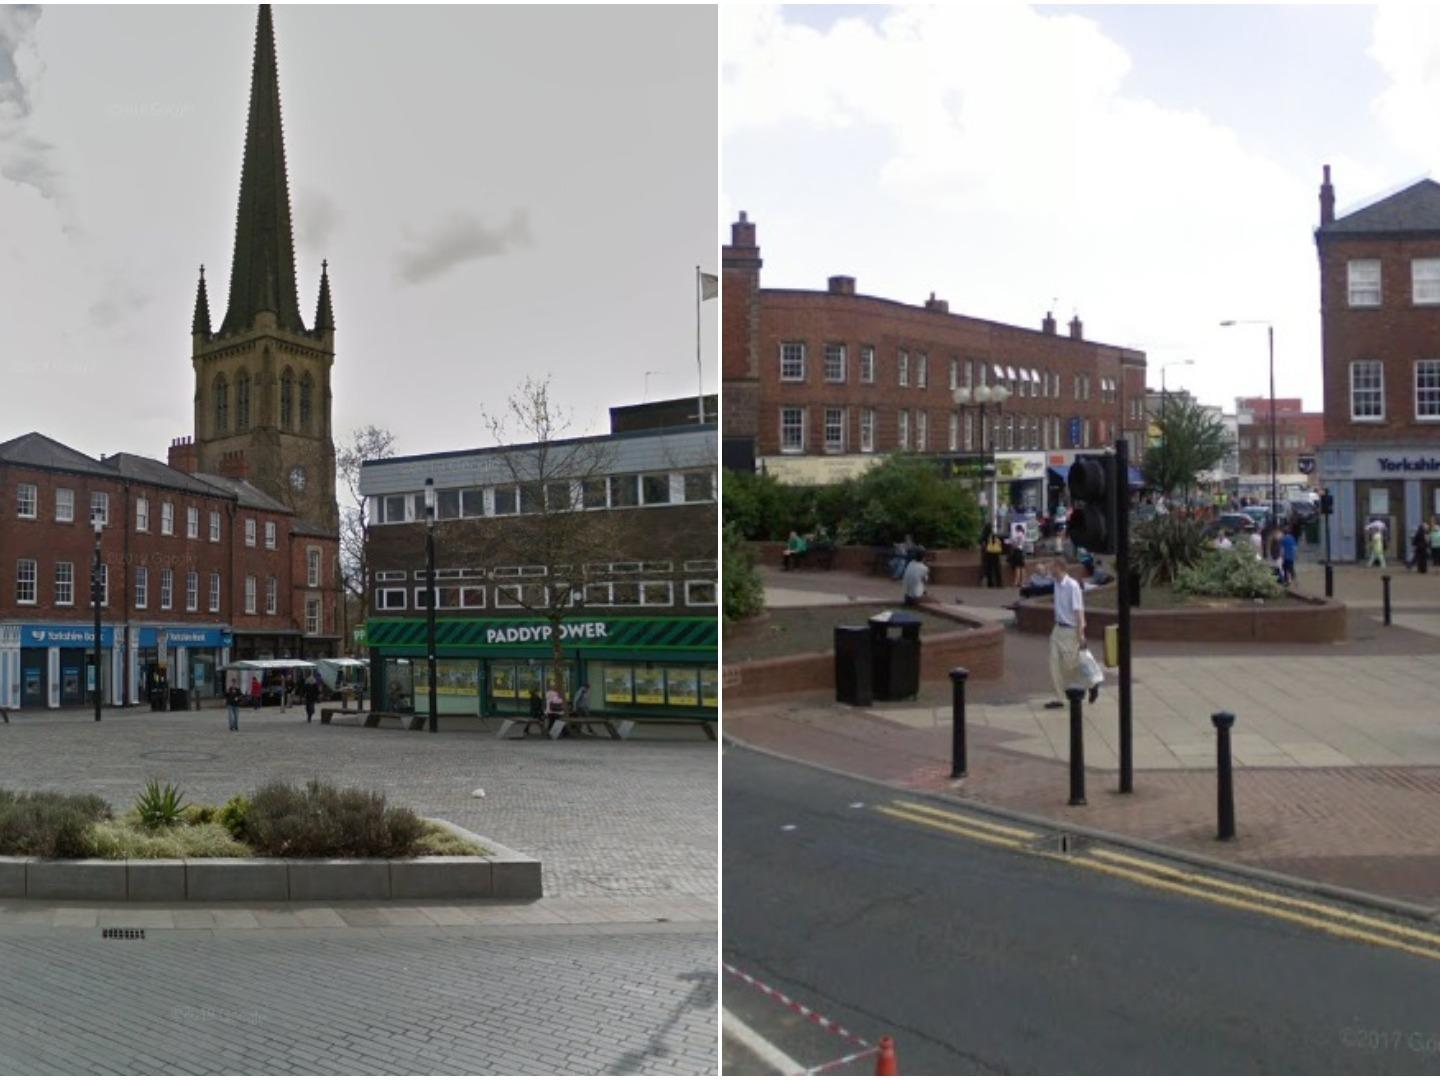 The Bullring pictured now and in 2008 shows the difference. The fountain isn't there for starters.